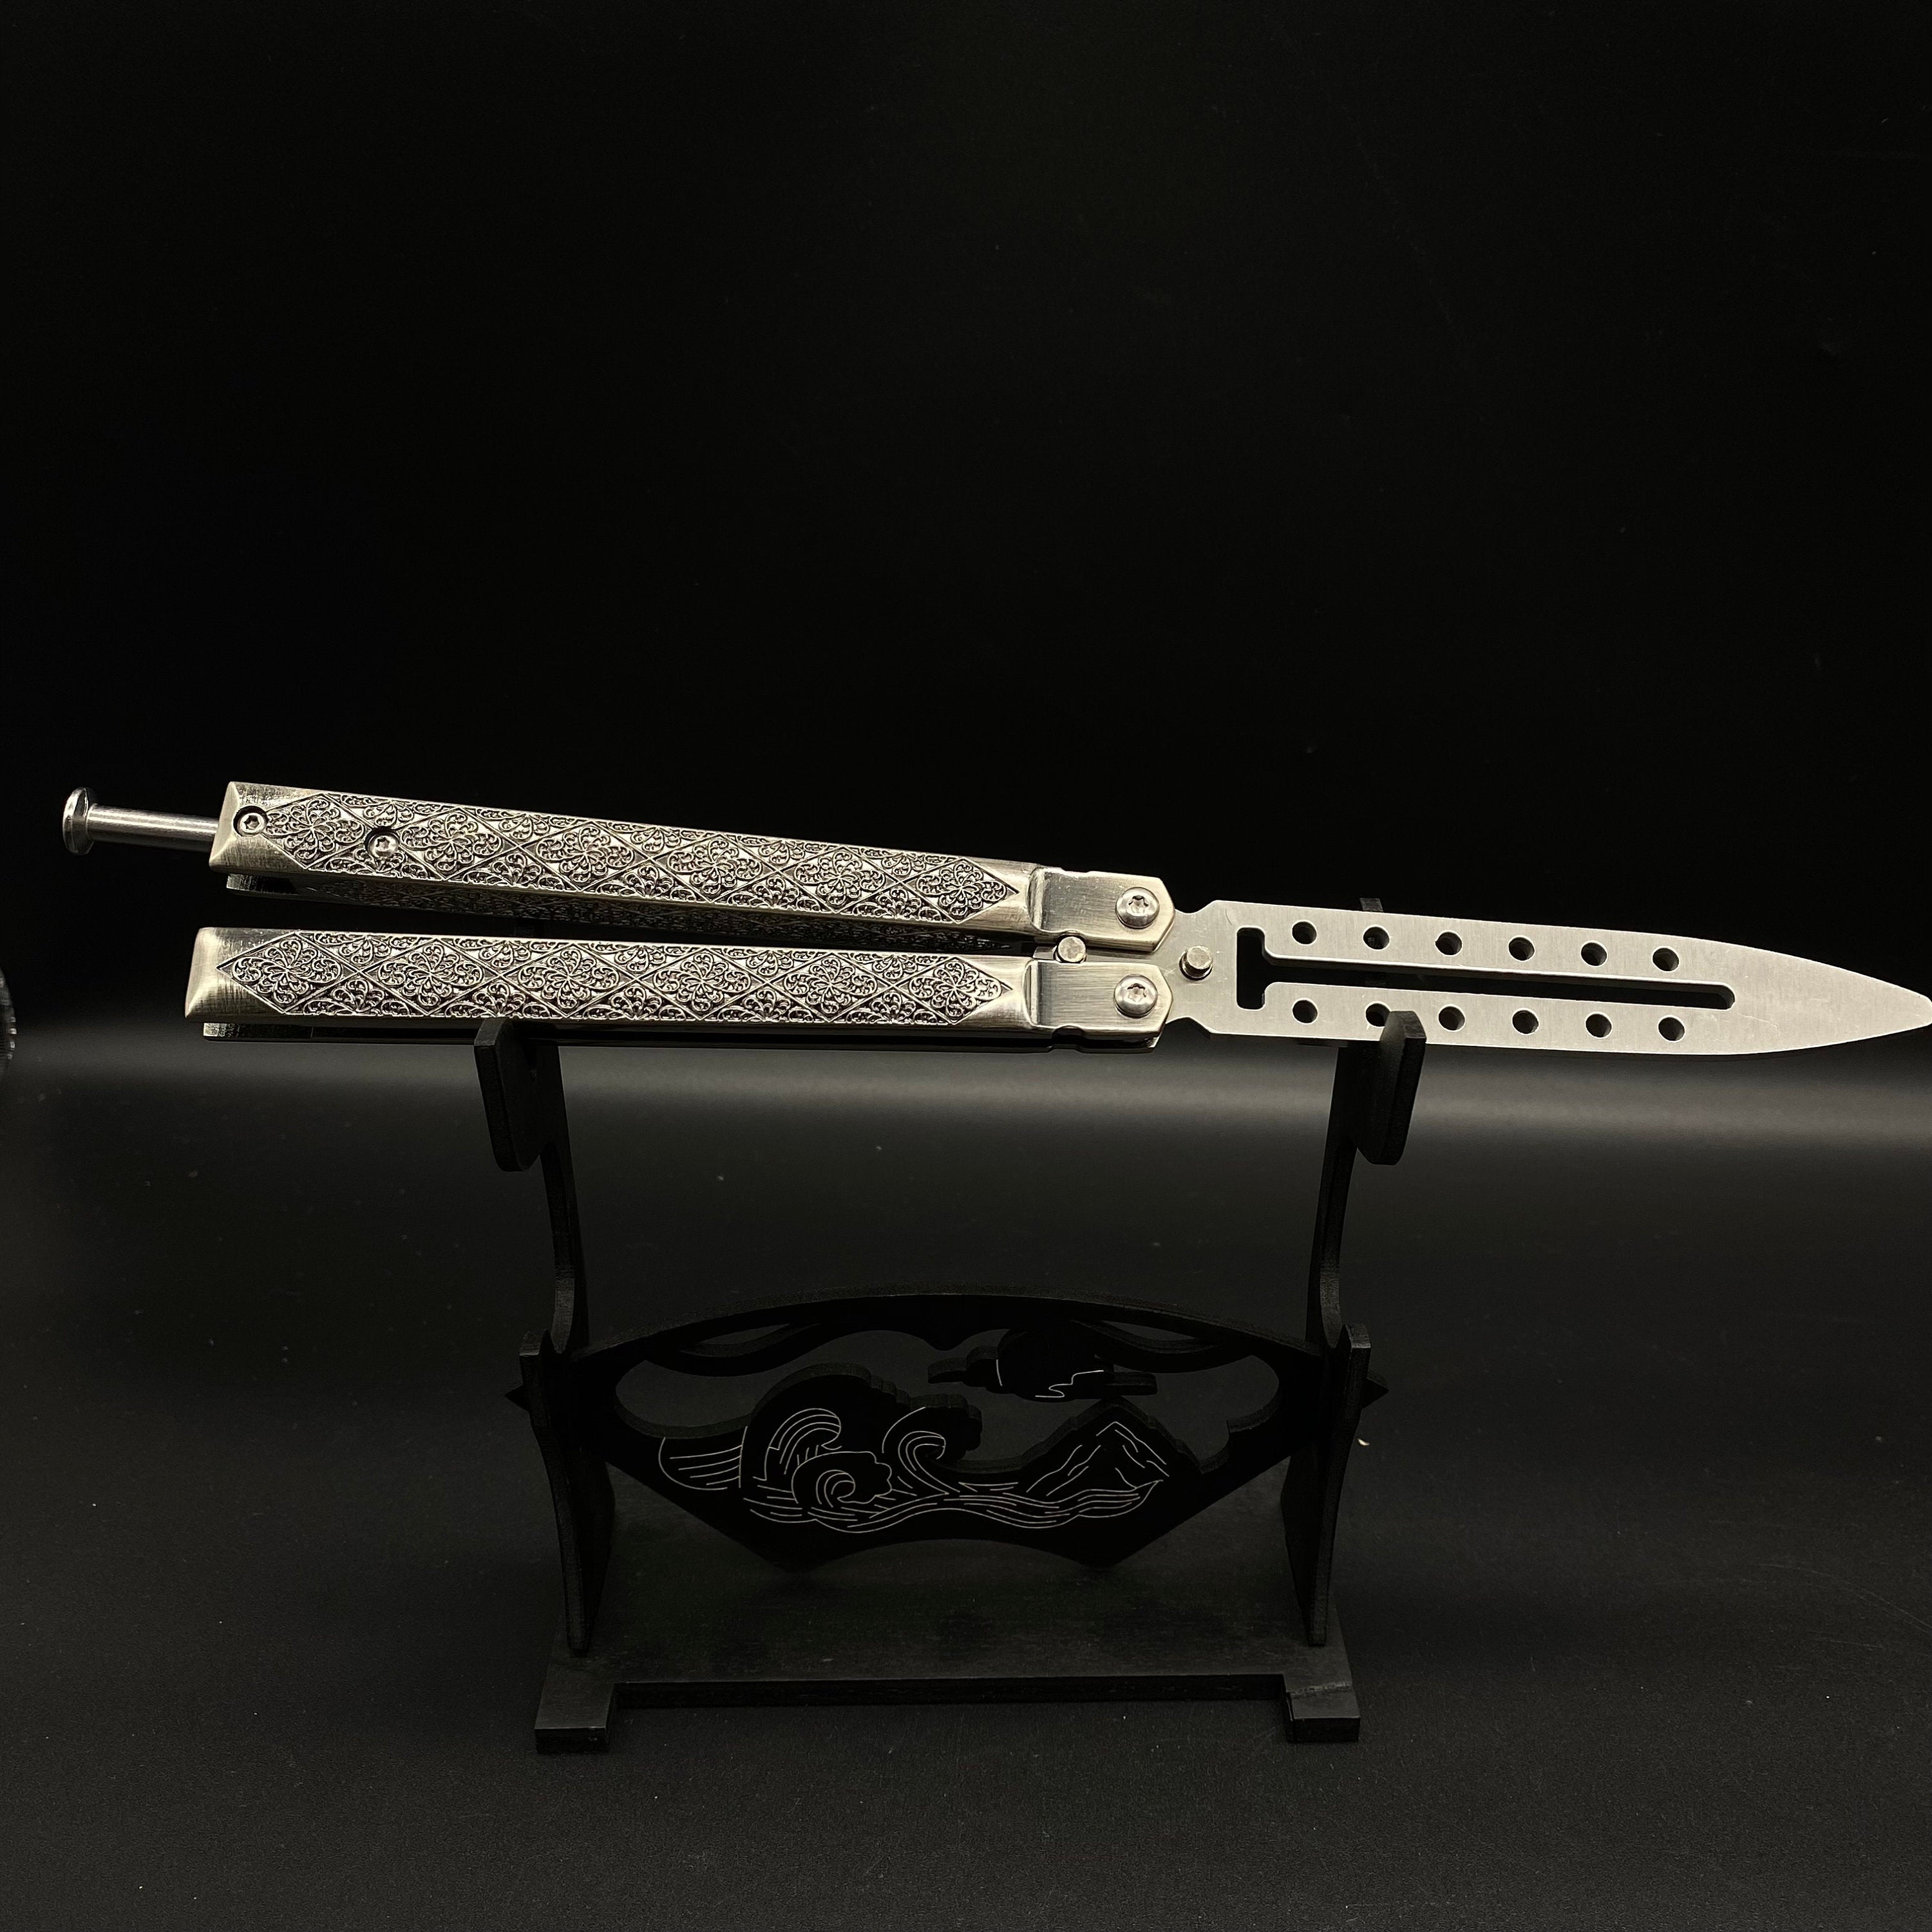 Non-Slip Handle Butterfly Knife